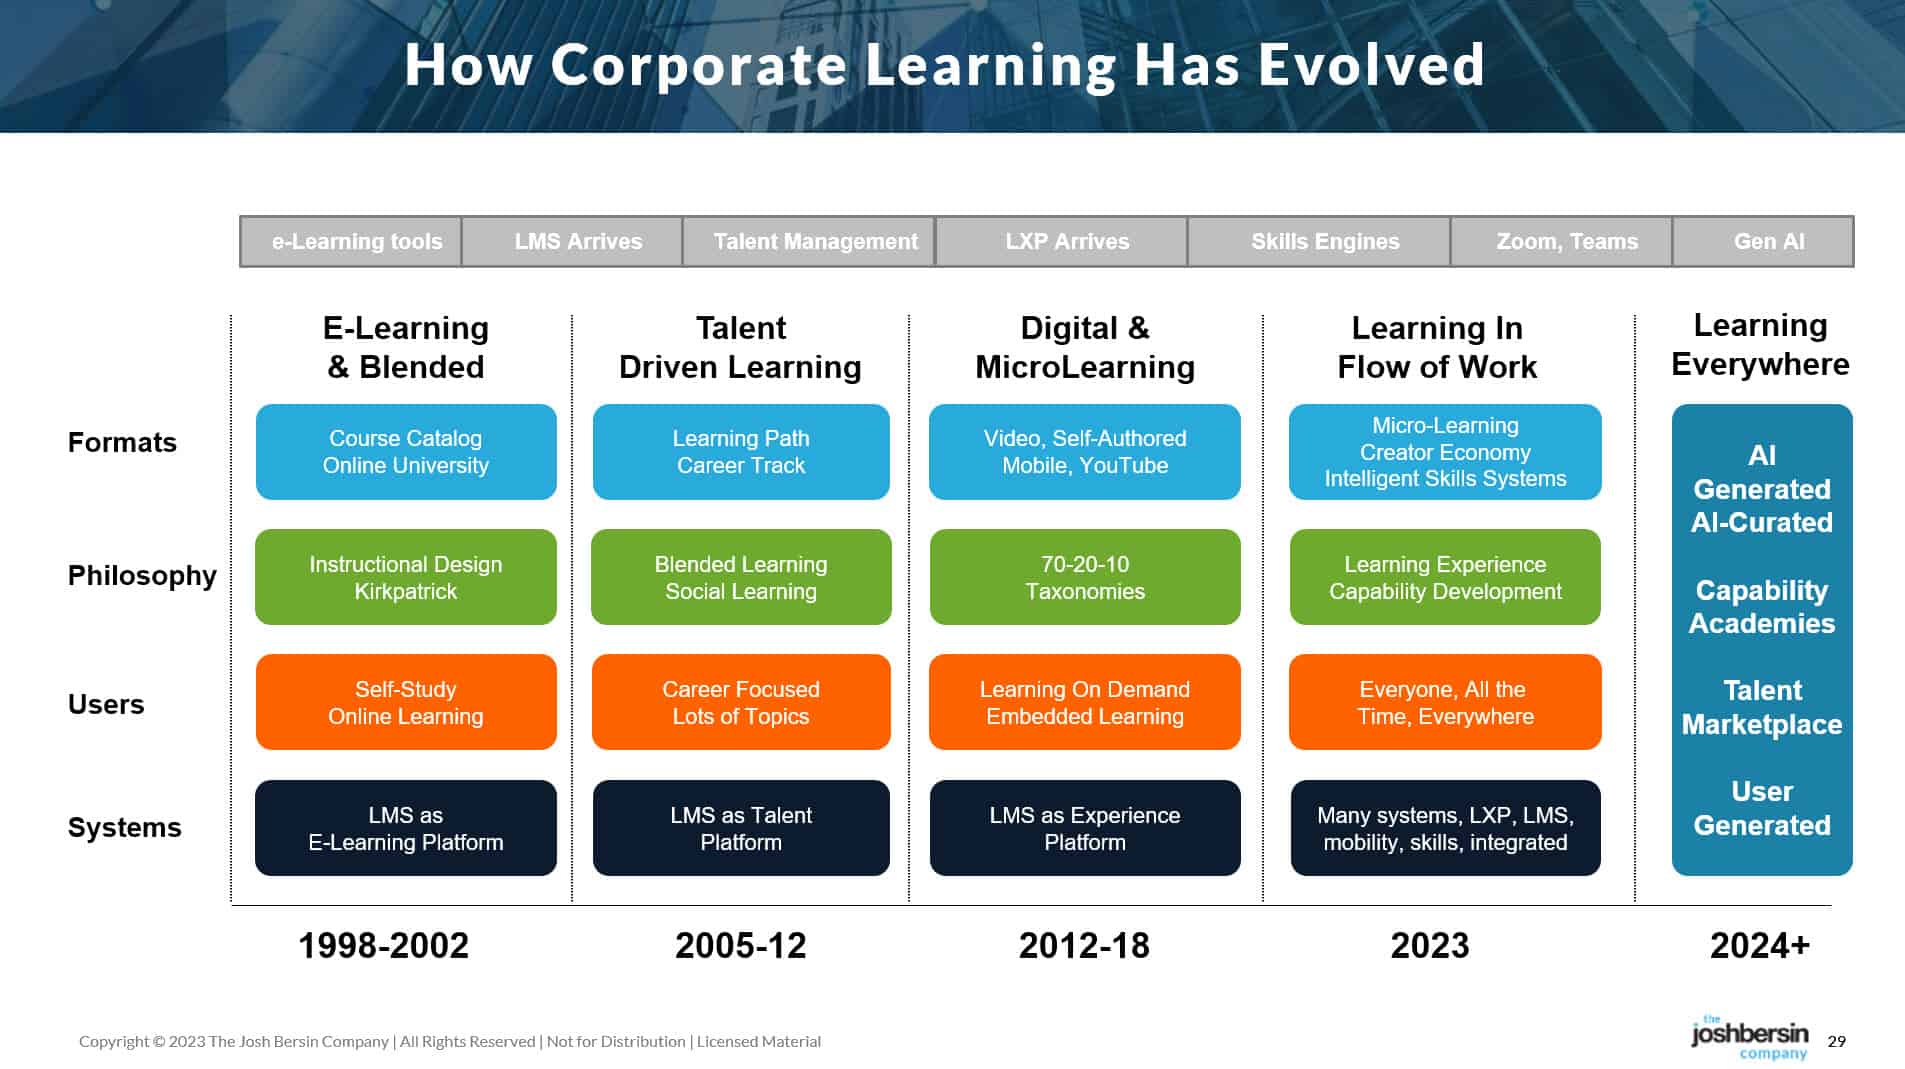 Mobile and Informal Learning: Trends for 2012